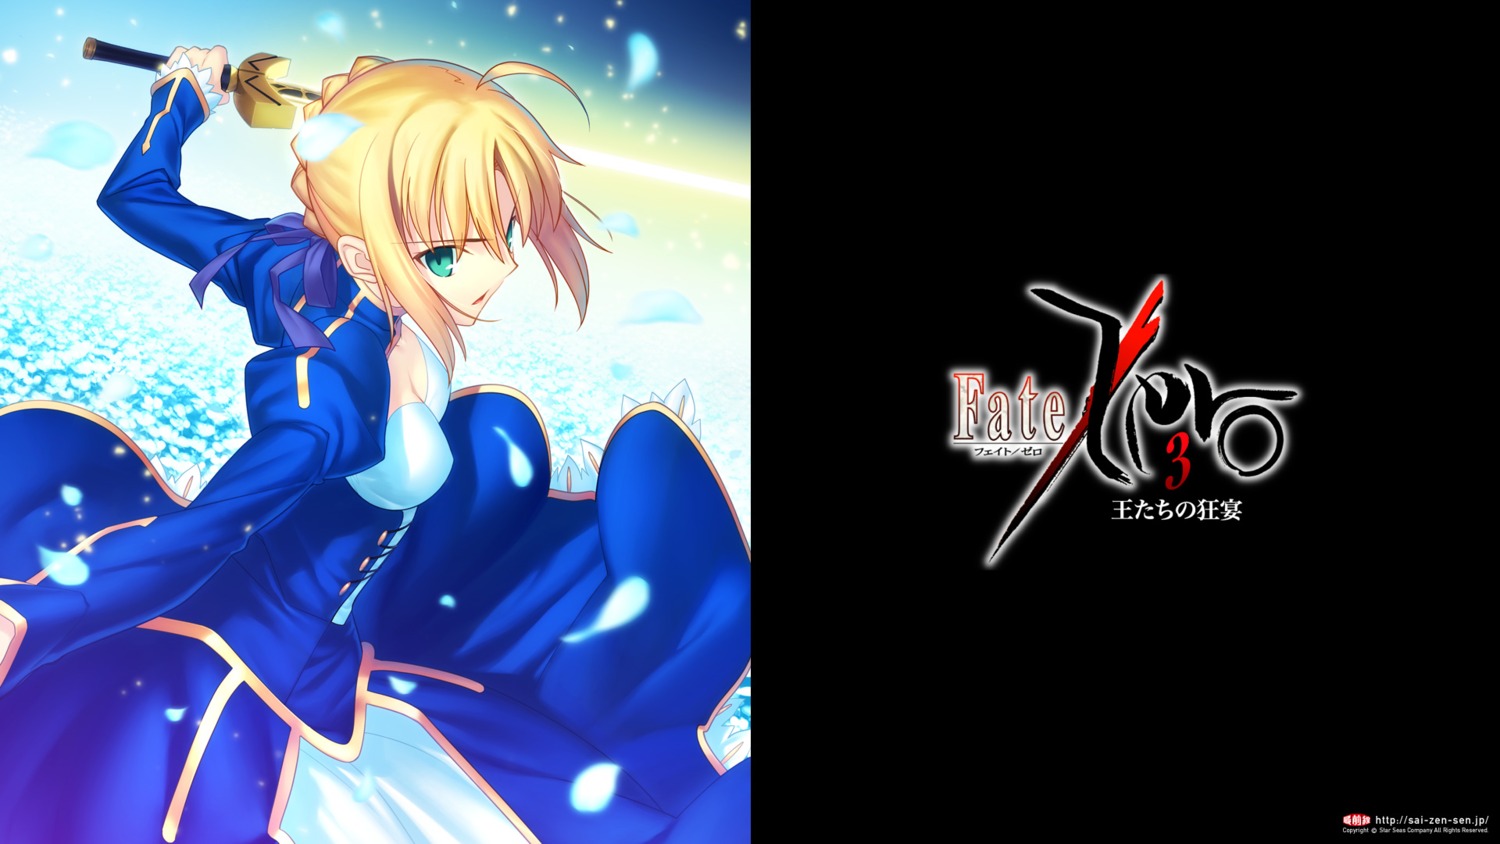 Live Wallpaper download Statistics  Fate zero, Fate stay night anime, Fate  stay night characters